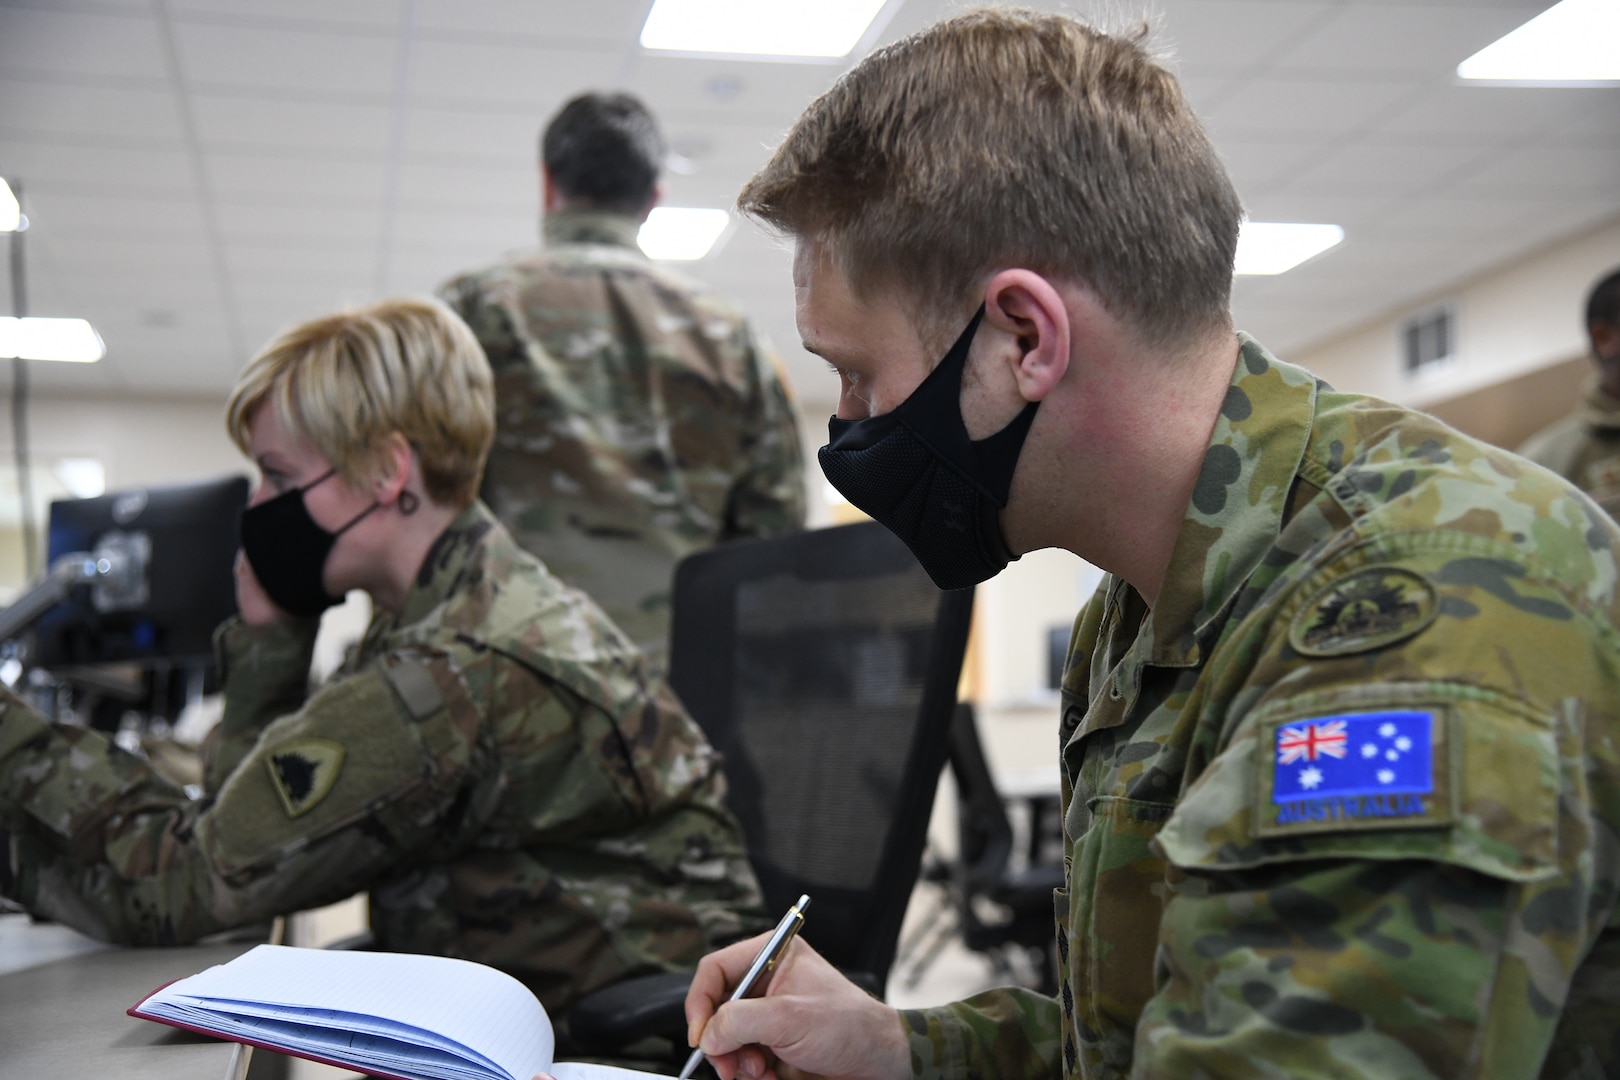 Australian Army Capt. Dustin Gold, a reserve officer from the Royal Australian Artillery 9th Regiment, participates in a Reserve Forces Foreign Exchange Program with D.C. National Guard in Washington D.C., Jan. 23, 2021.